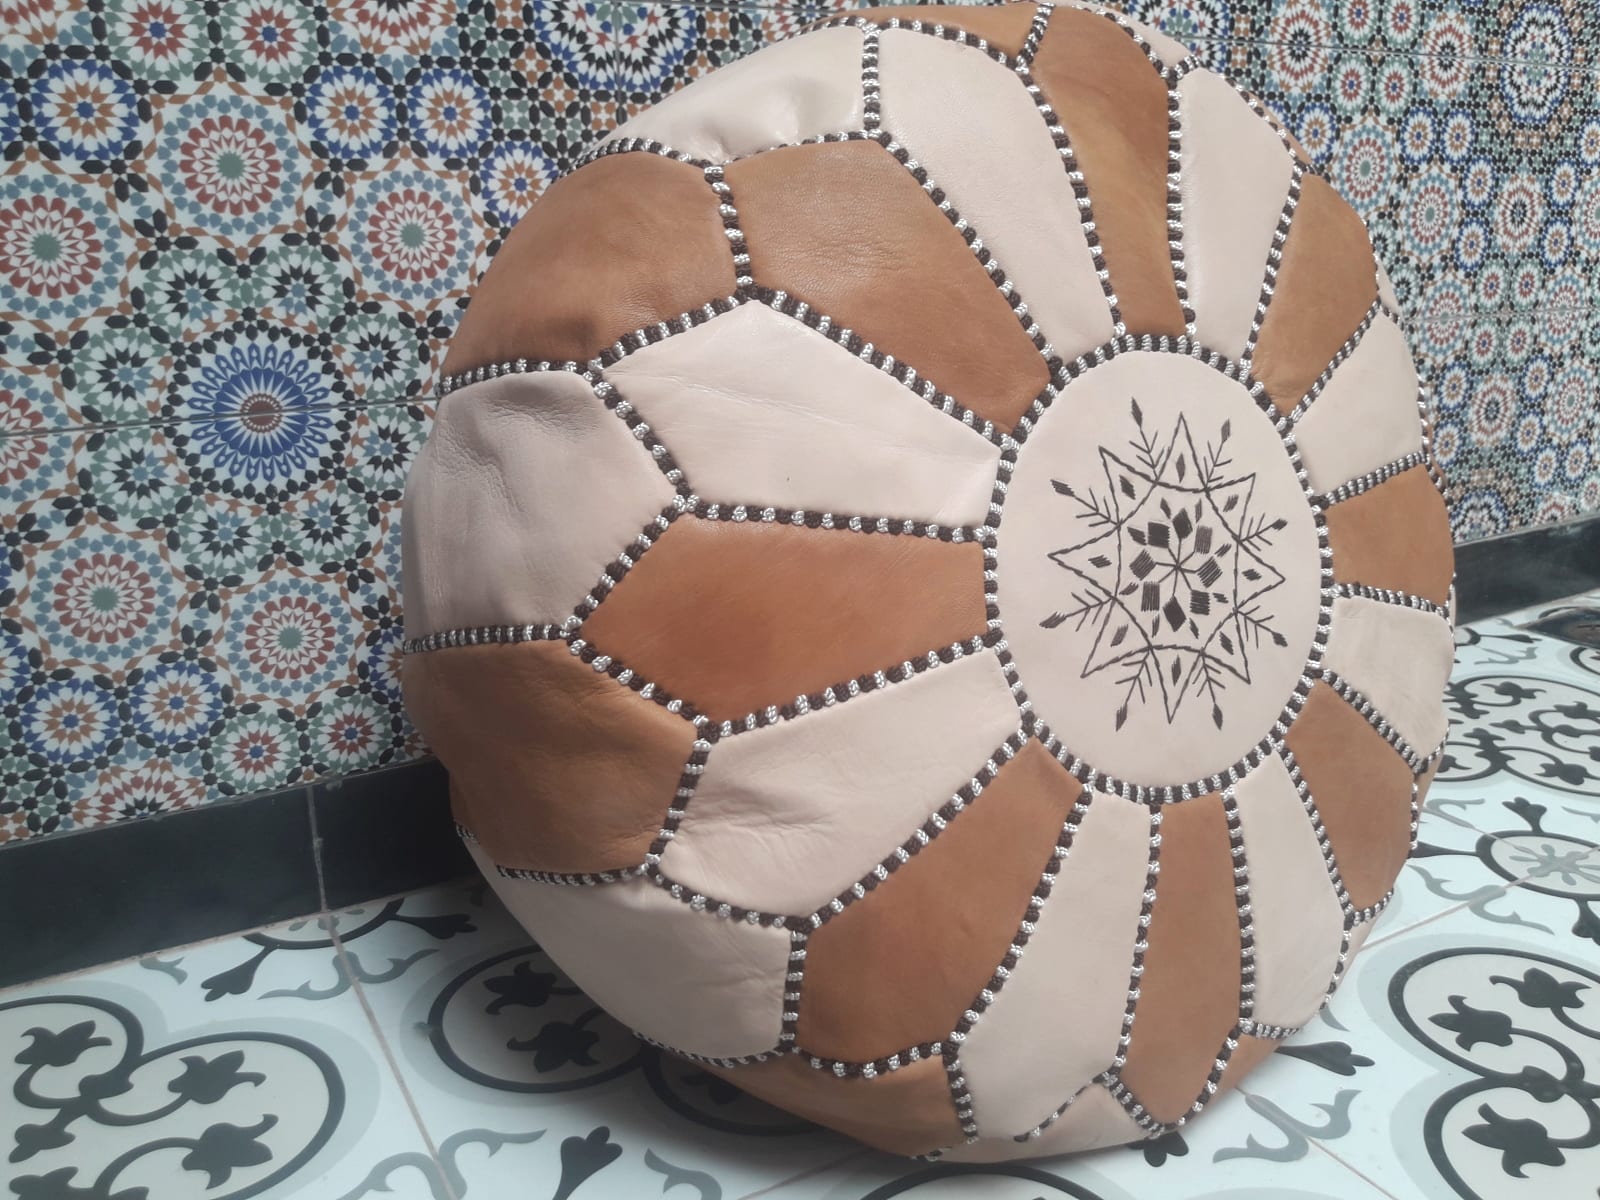  Pouf leather and Sabra silk Brown, White Morocco